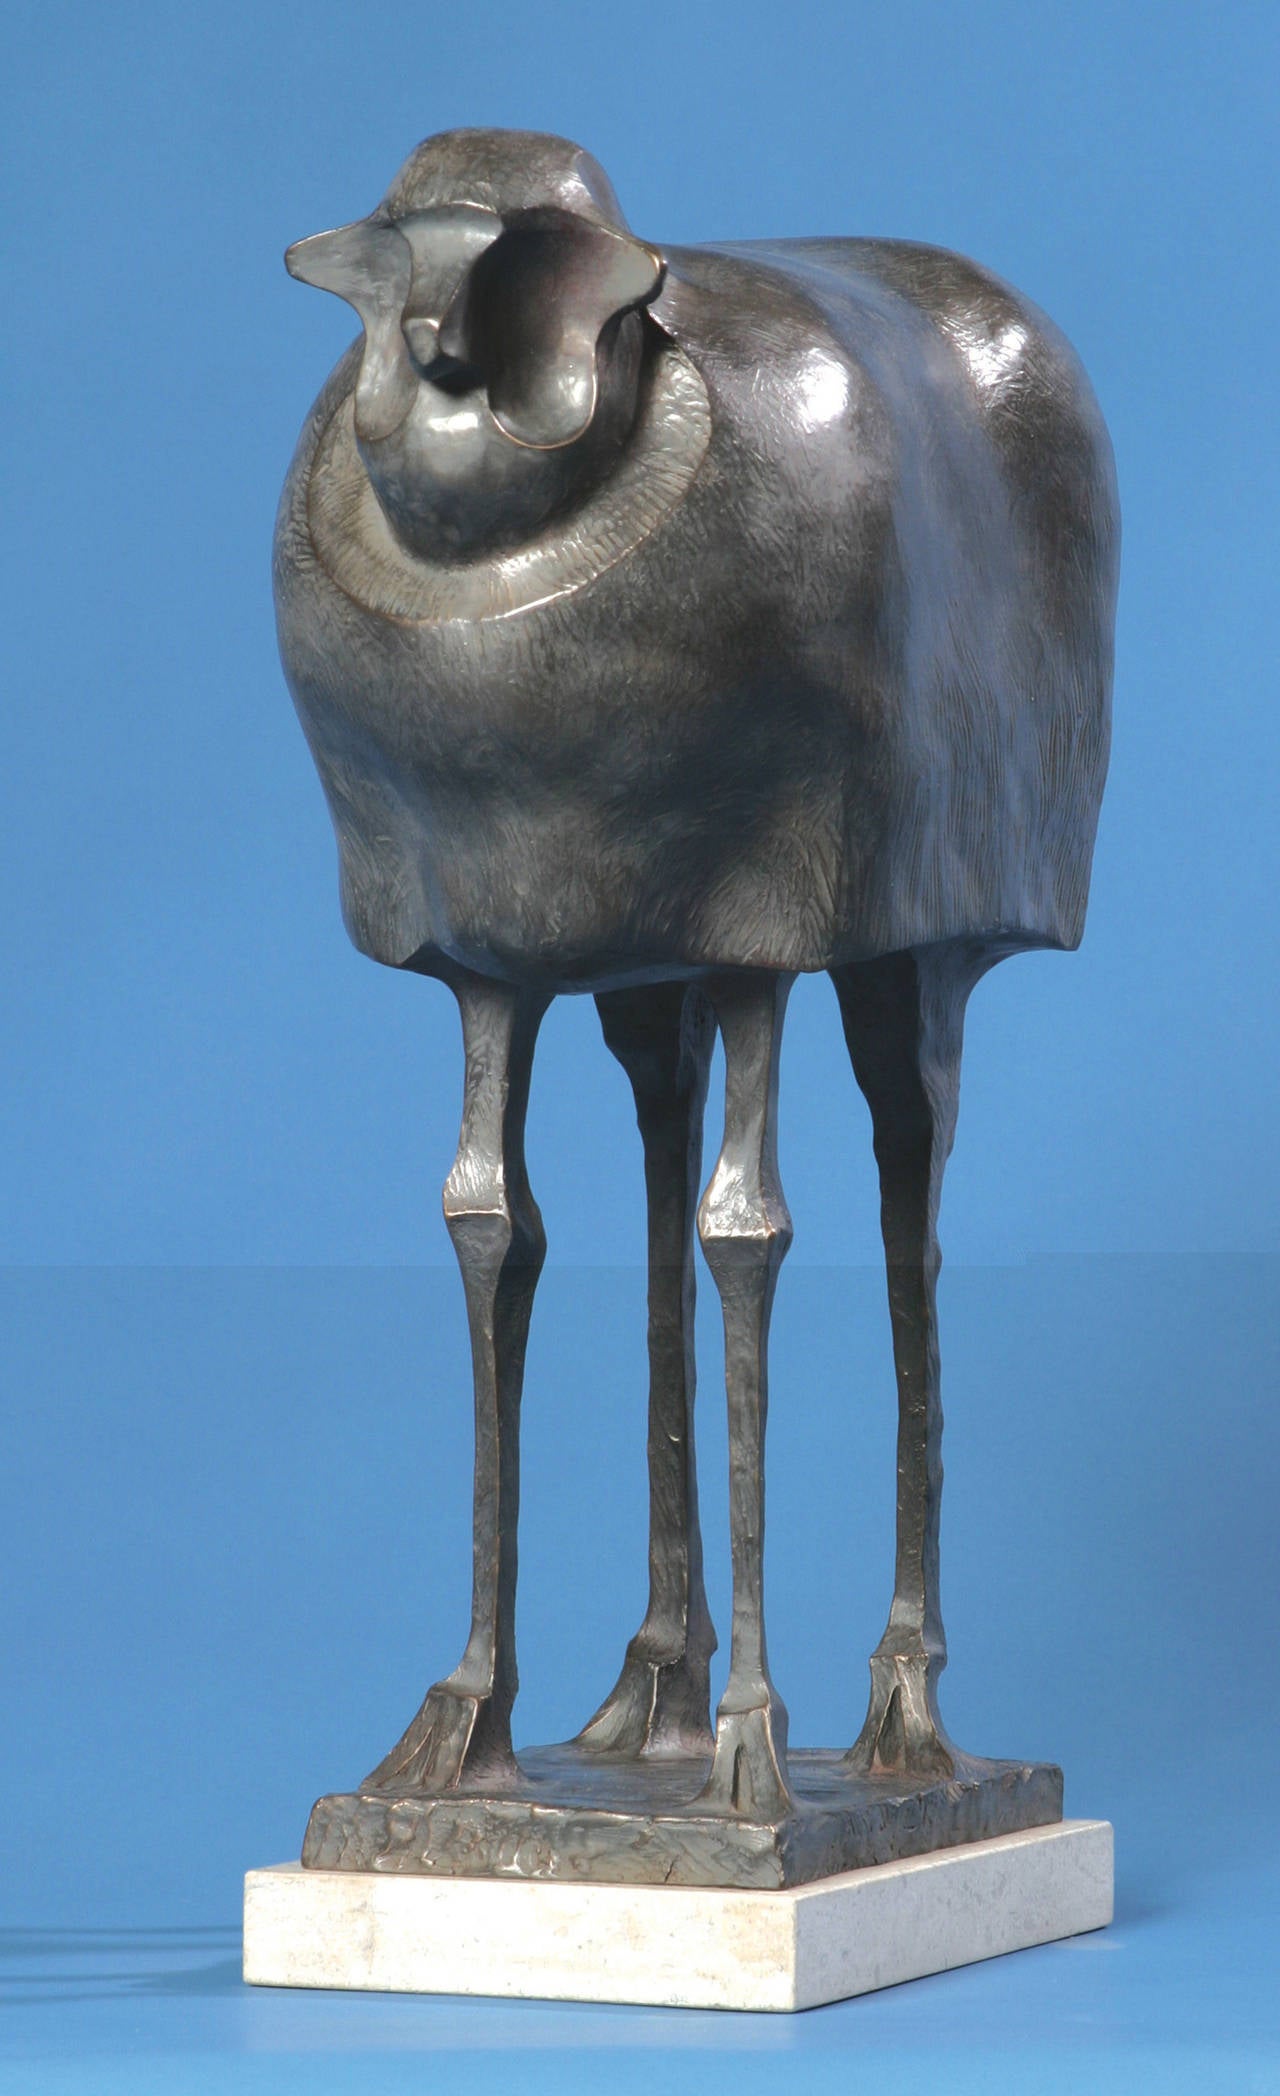 Wayne Salge Figurative Sculpture - "Three Bags Full" Silver-colored bronze depiction of a sheep. 